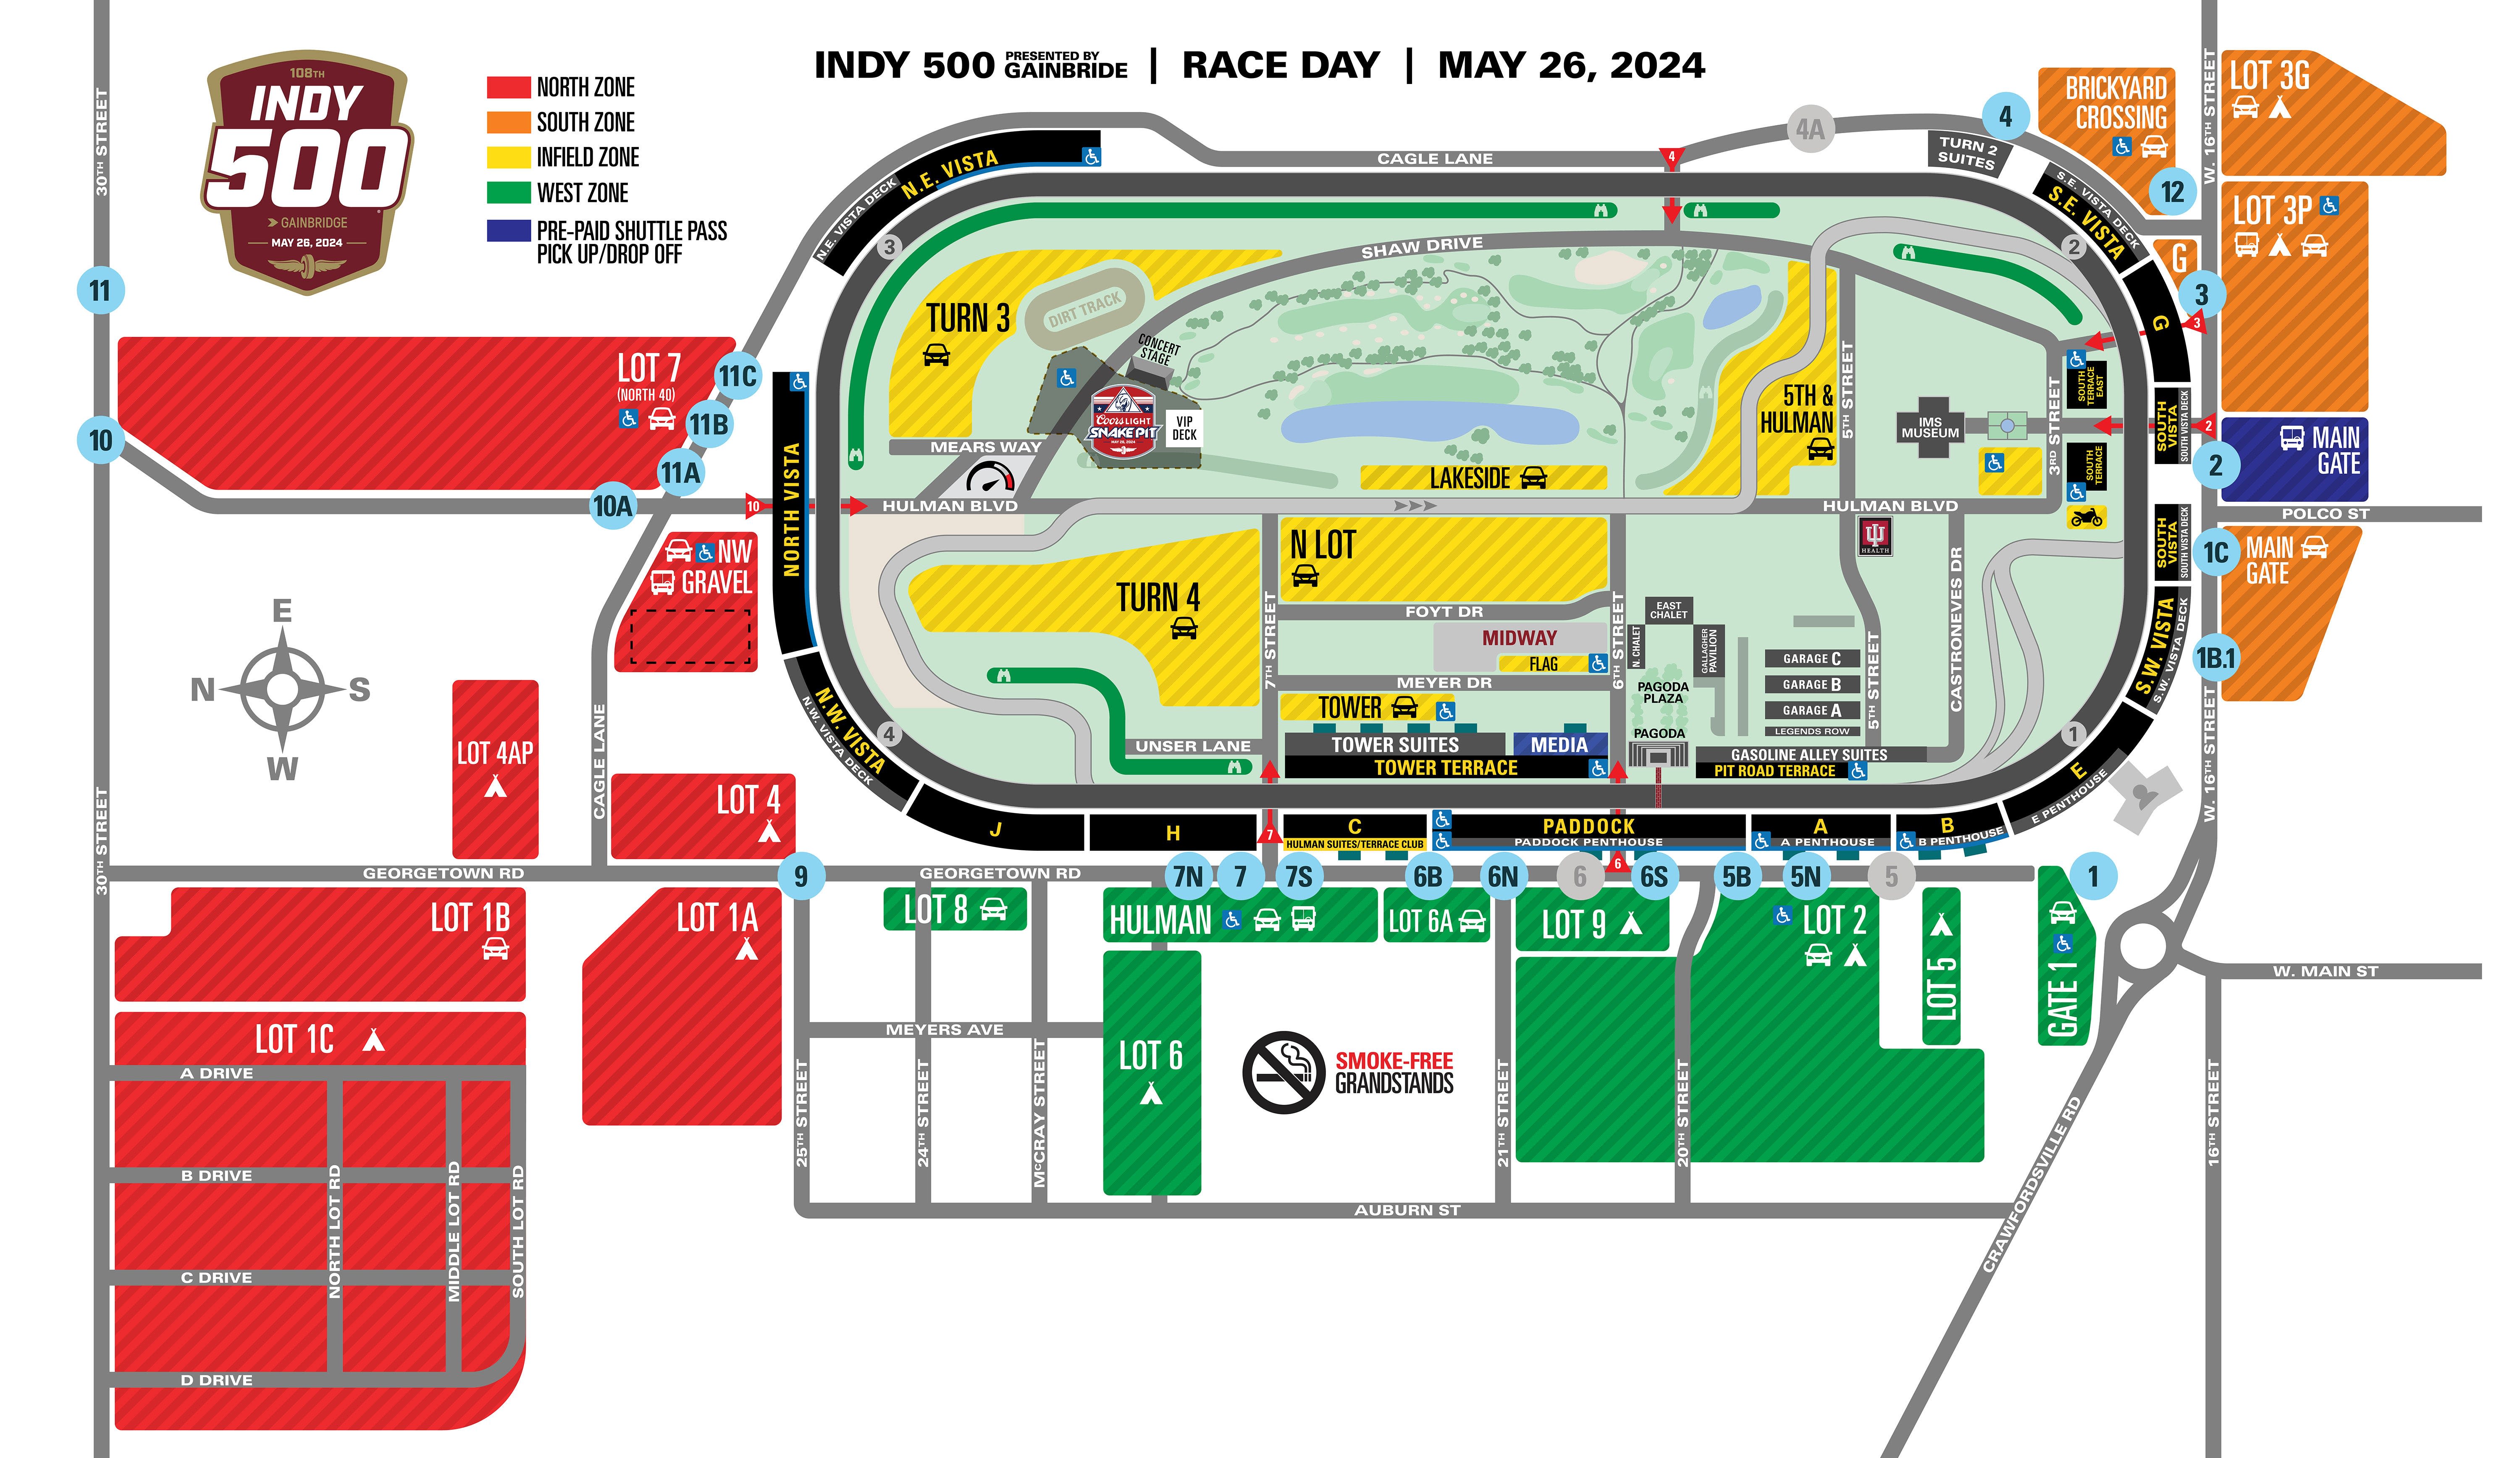 Going to the Indy 500? Here's a printable map of Indianapolis Motor Speedway